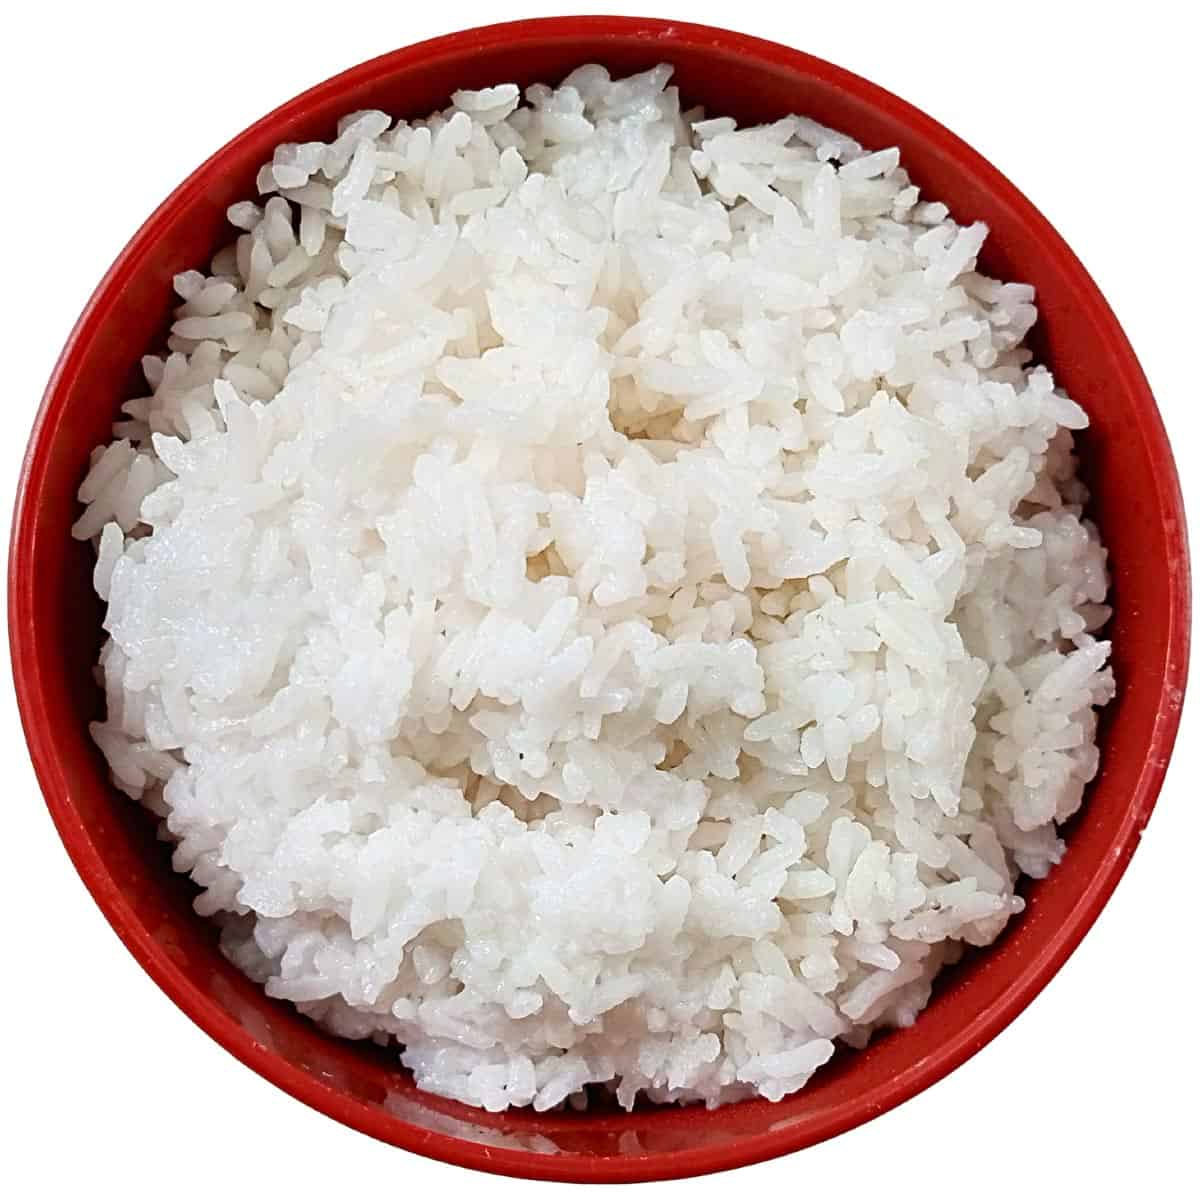 Steamed white rice in a red bowl.